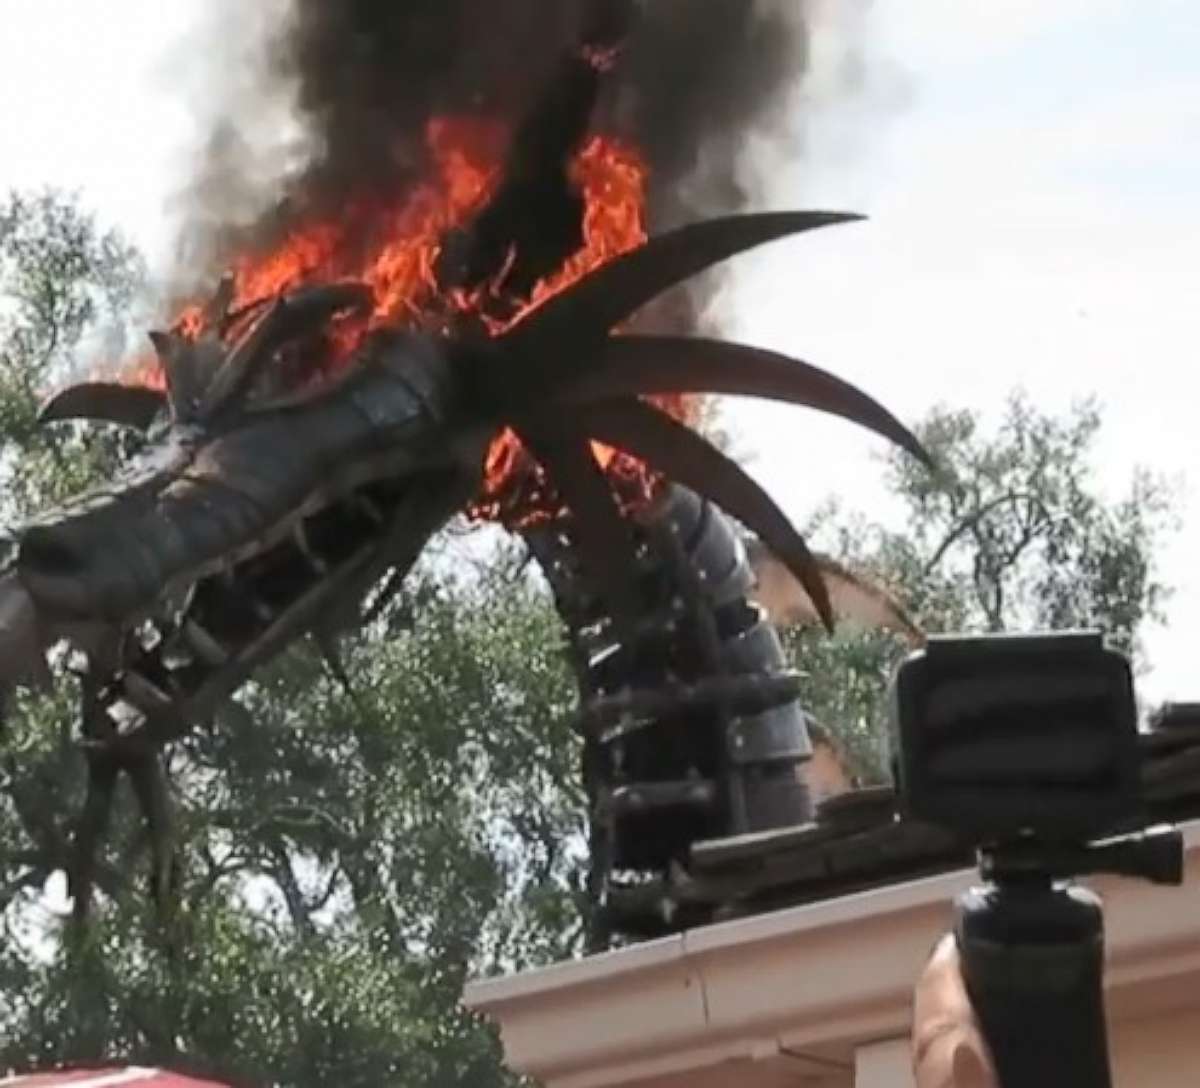 The dragon float in the Festival of Fantasy parade at Disney World caught fire on Friday, May 11, 2018. No one was injured.